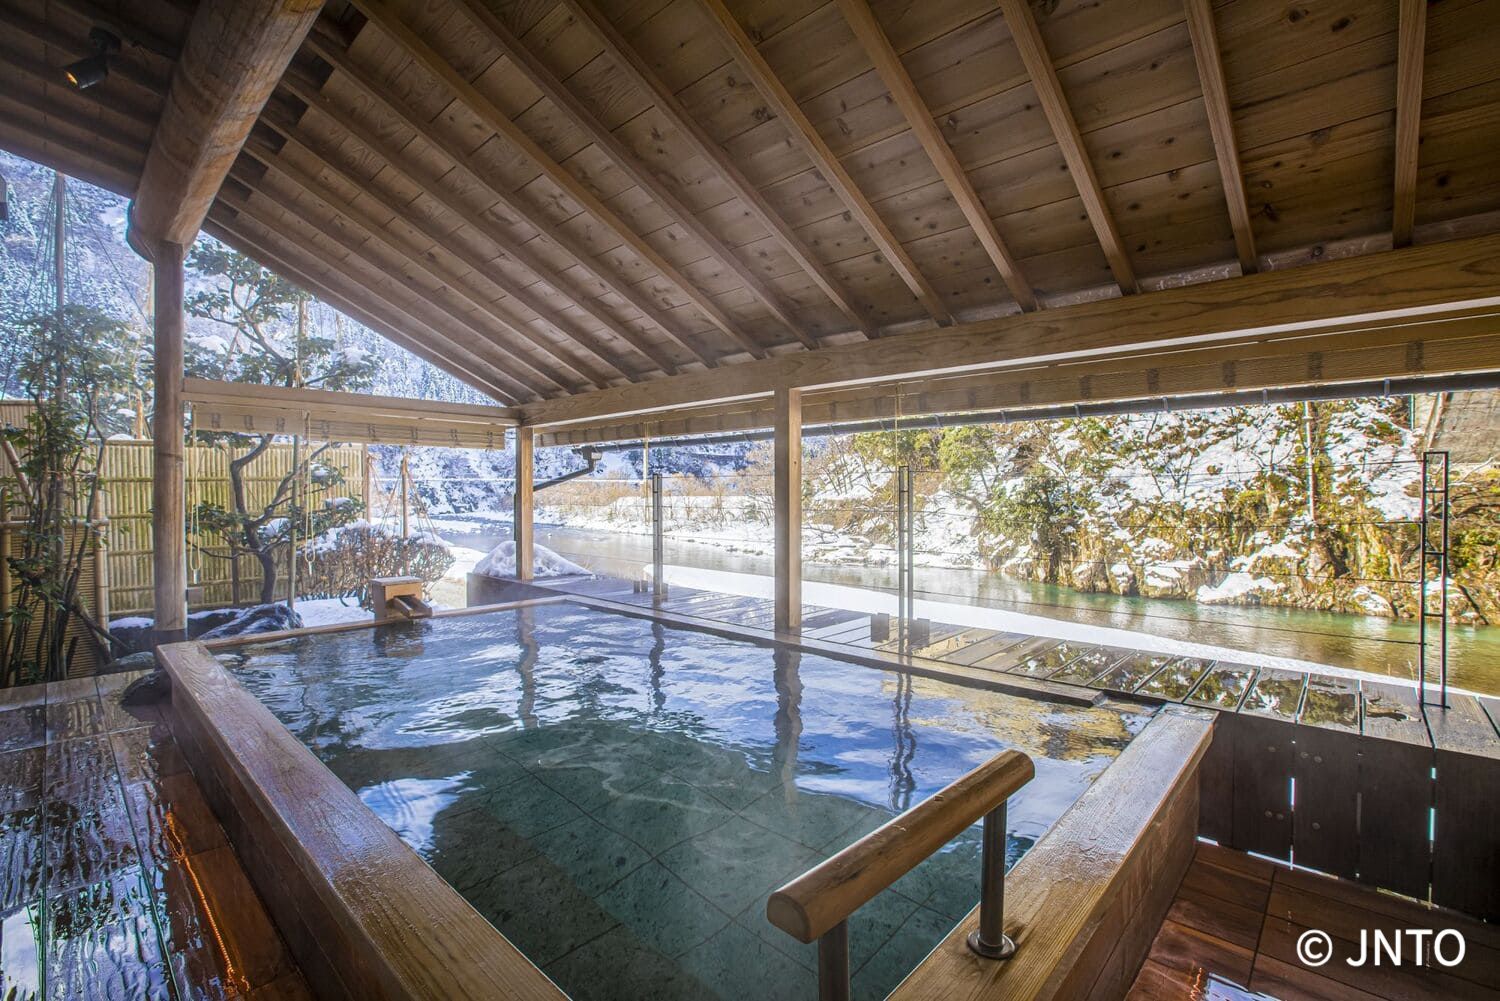 Japanese hot springs, the ultimate Japanese experience